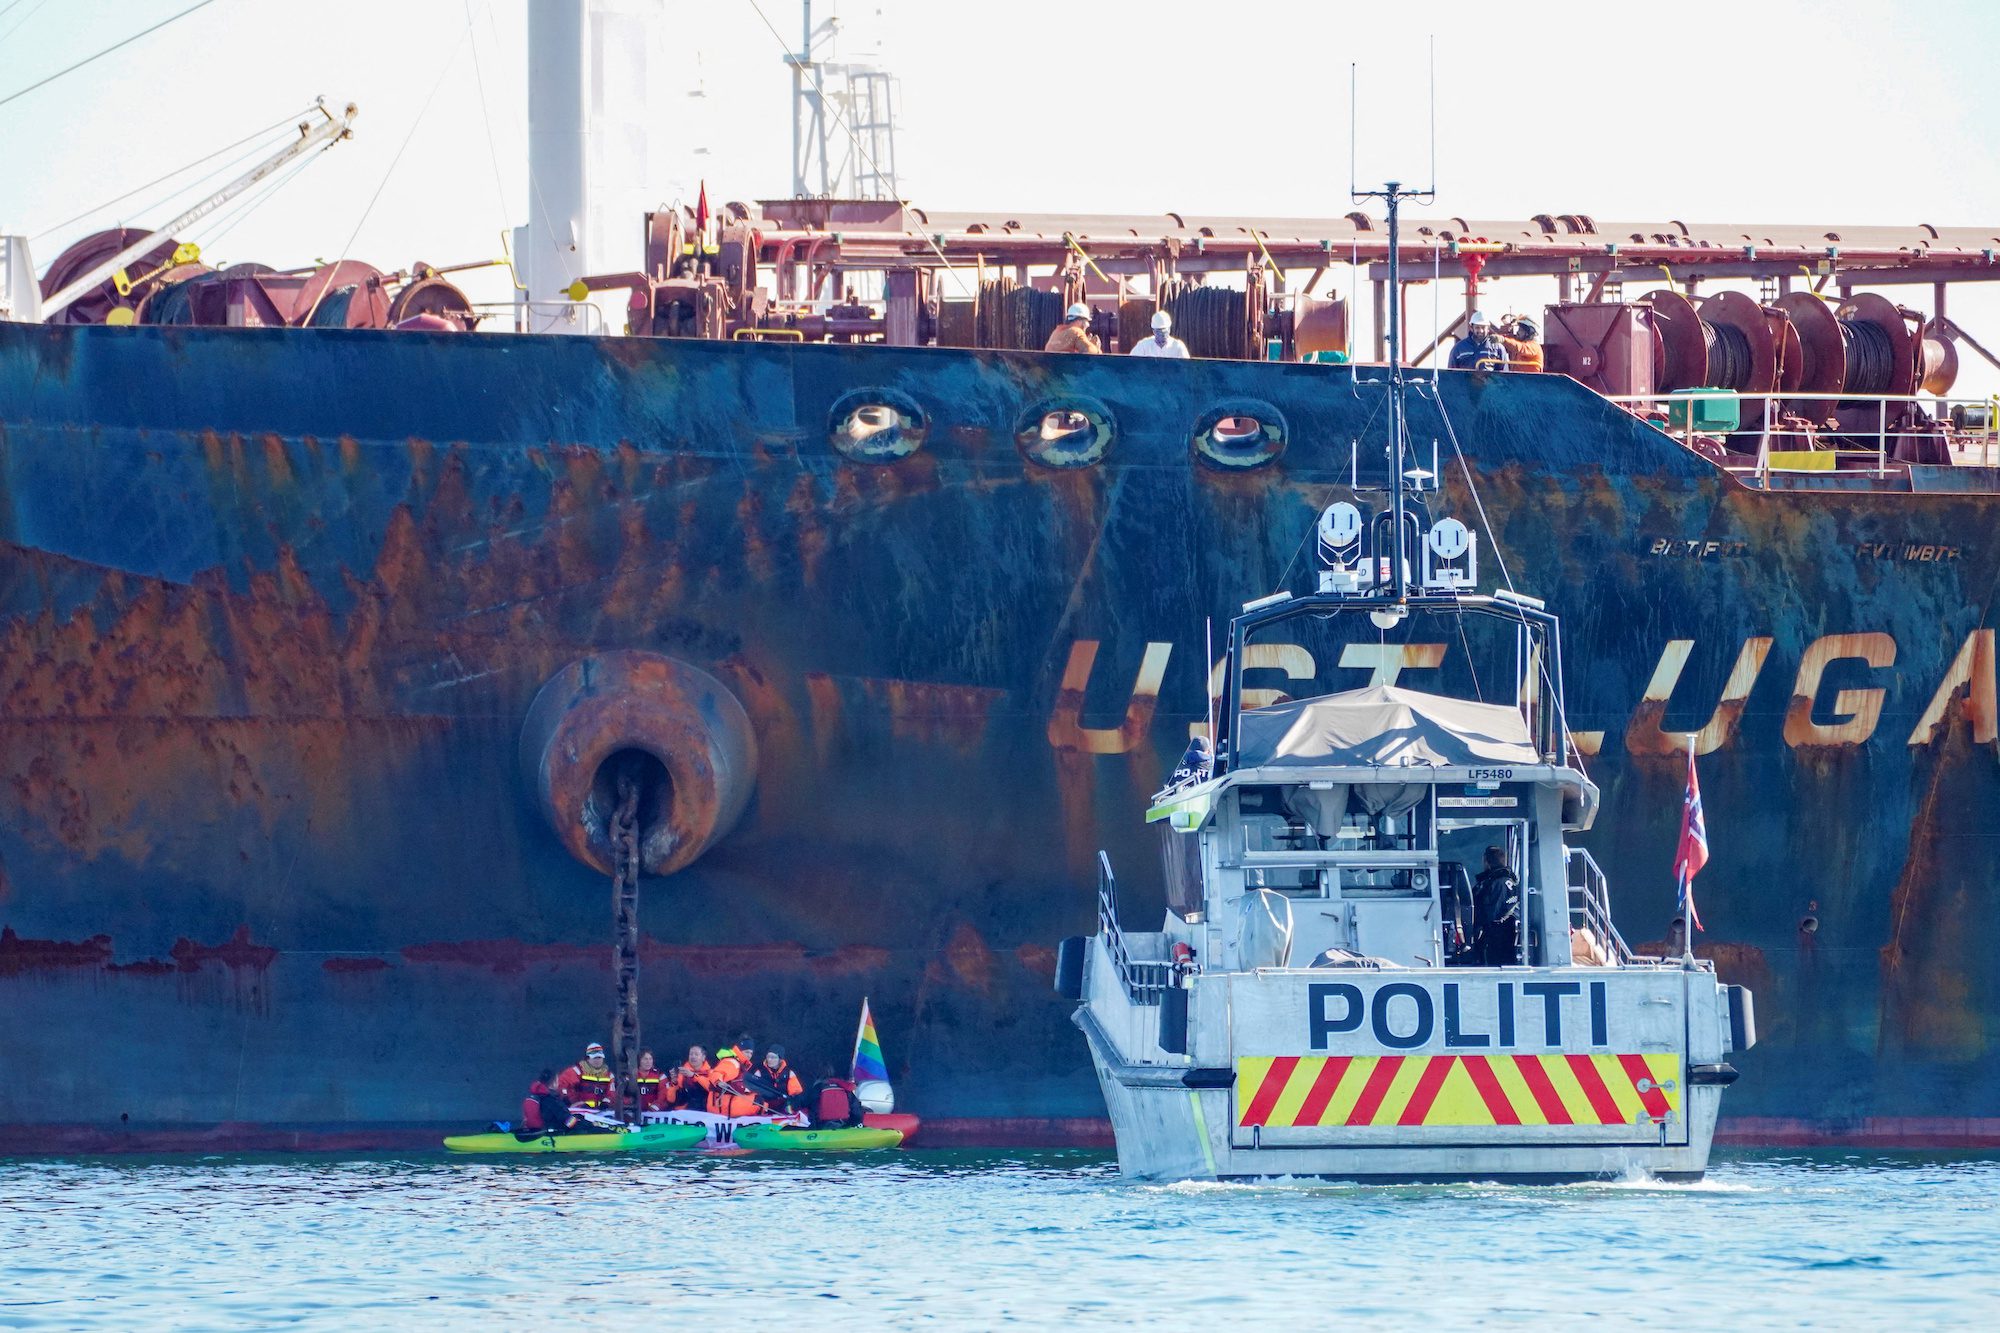 A police vessel sails near members of Greenpeace blocking a tanker "Ust Luga" from delivering Russian oil to Norway as part of a protest against the Russia's invasion of Ukraine.